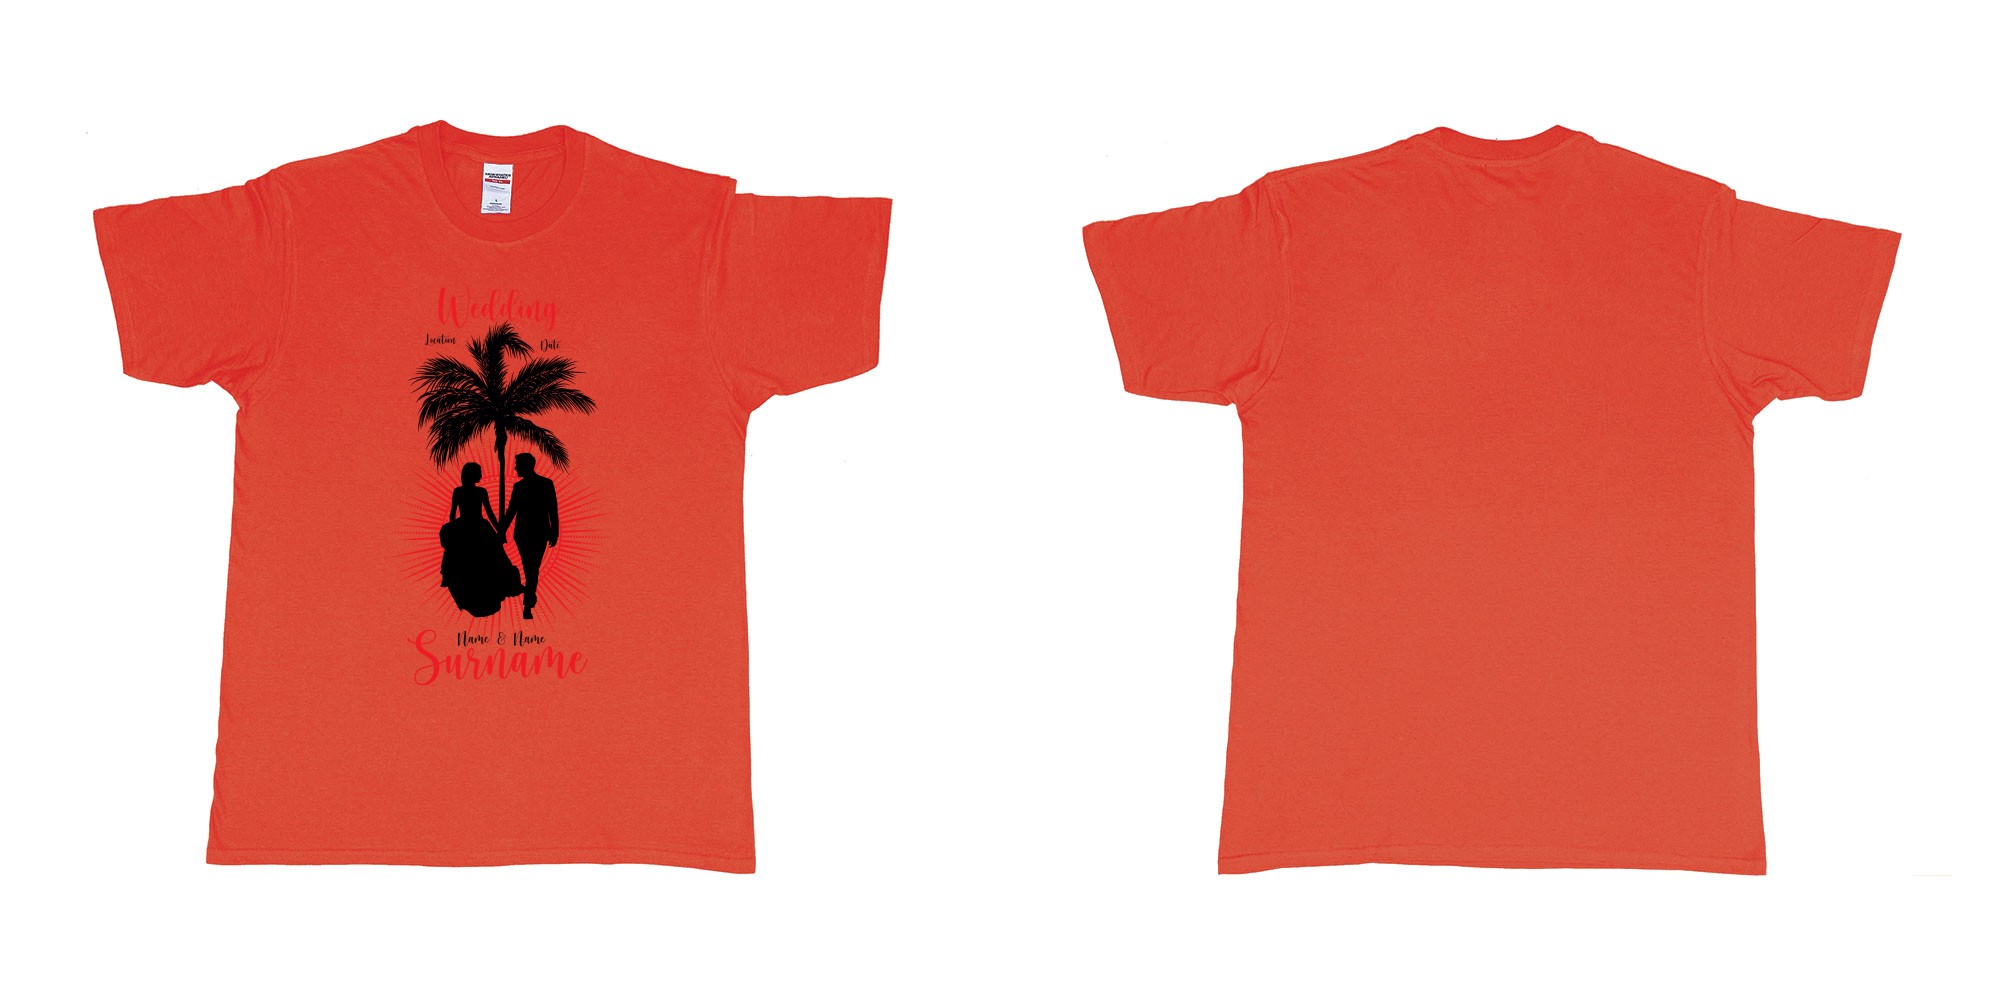 Custom tshirt design wedding palm sun bali in fabric color red choice your own text made in Bali by The Pirate Way